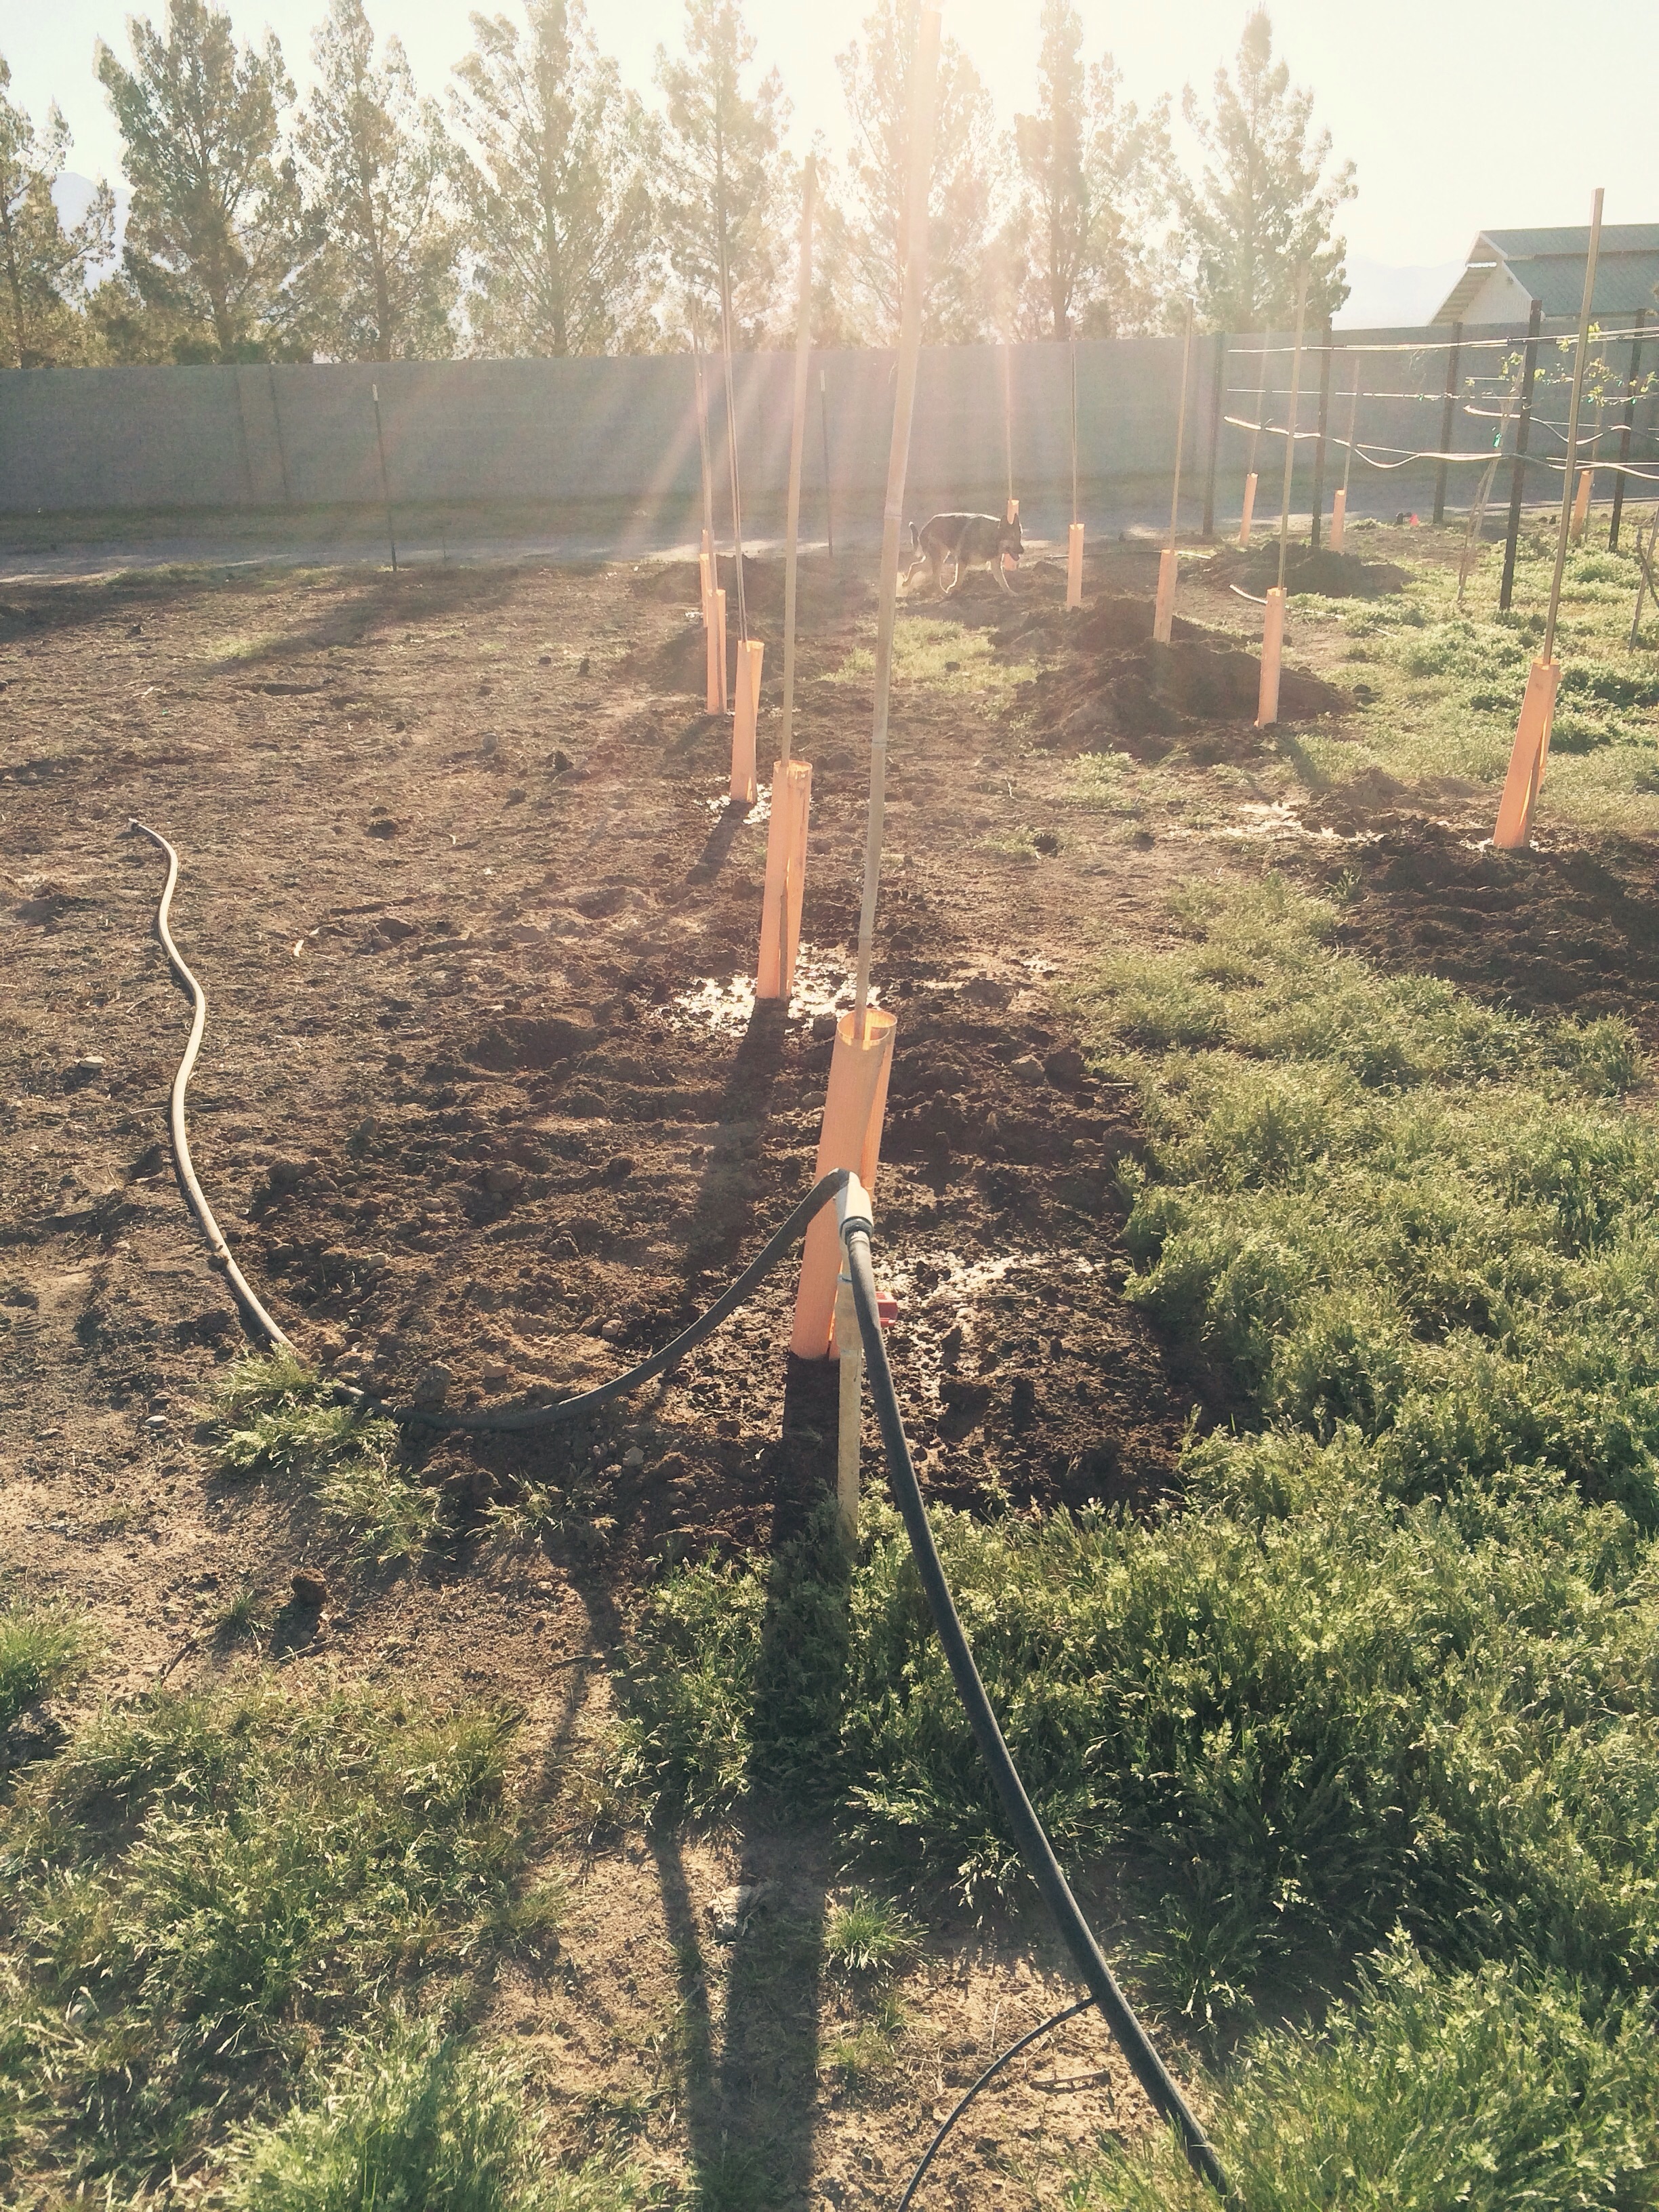 We got our 30 new zinfandel vines planted as well as our all blue and cranberry red potatoes planted on our farm Sunday 